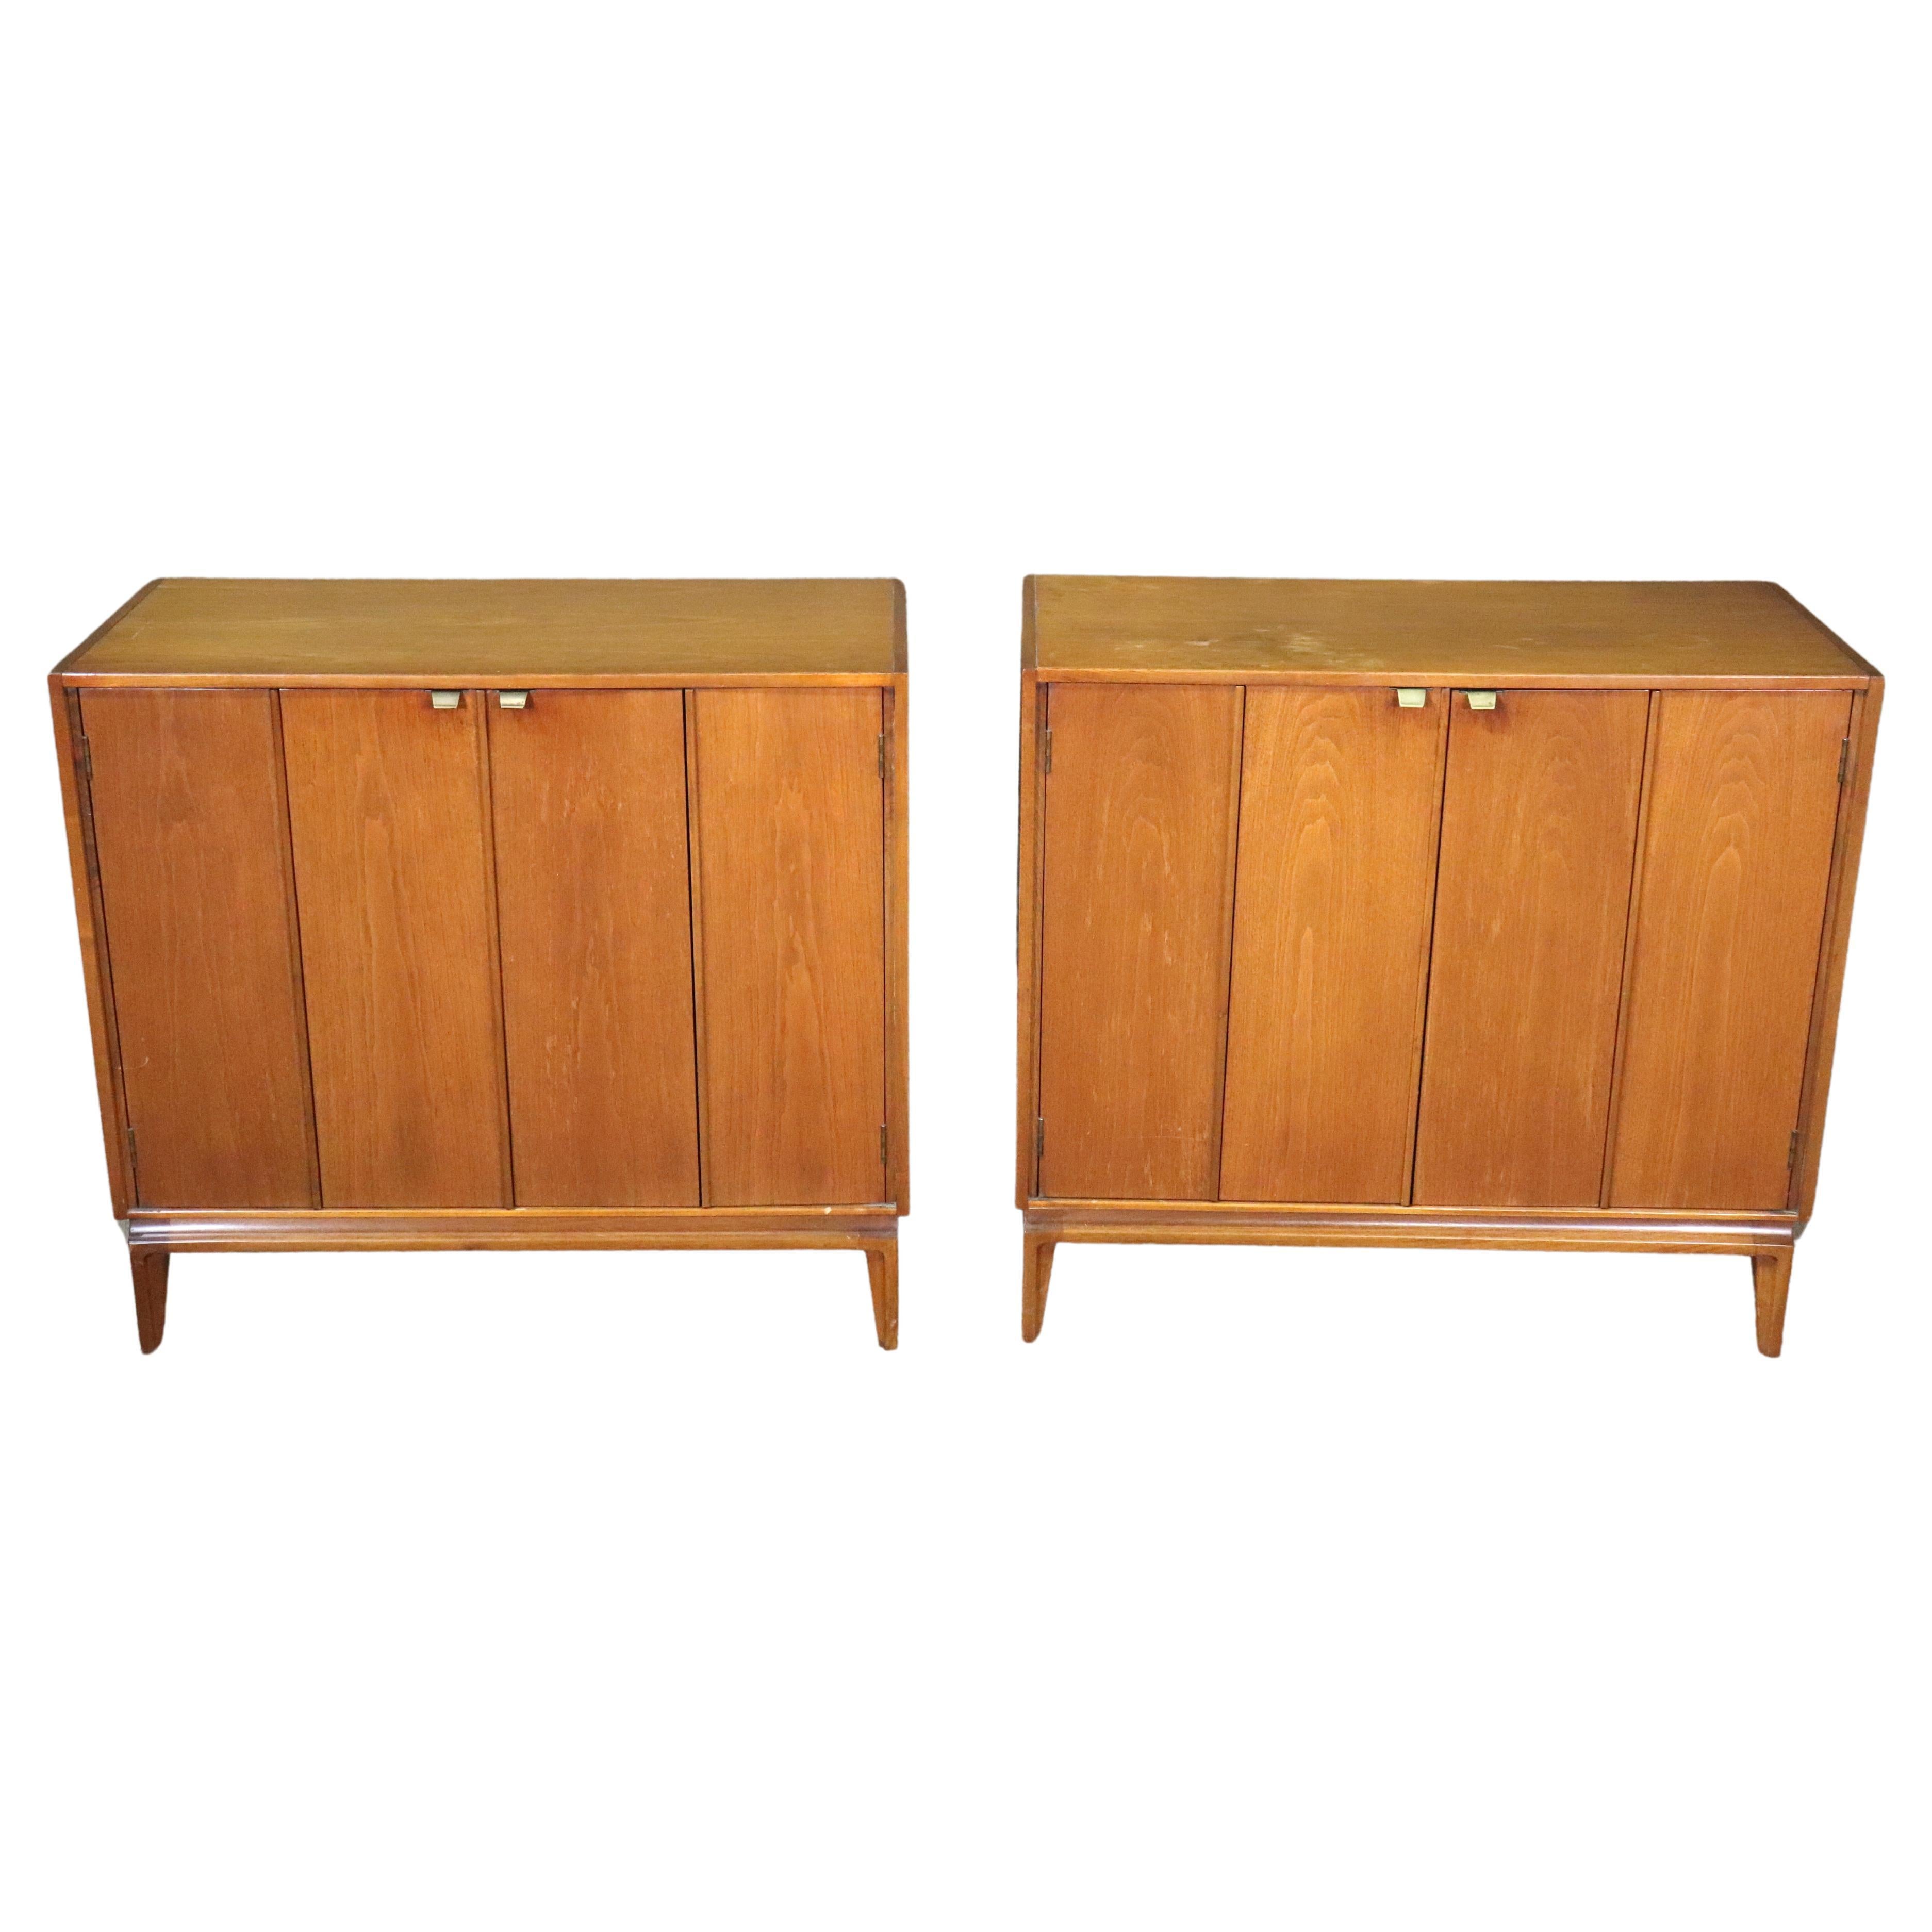 American made mid-century cabinet with bi-fold doors. Metal pulls open the doors to reveal an open cabinet with shelf. 
Listing is for one.
Please confirm location NY or NJ